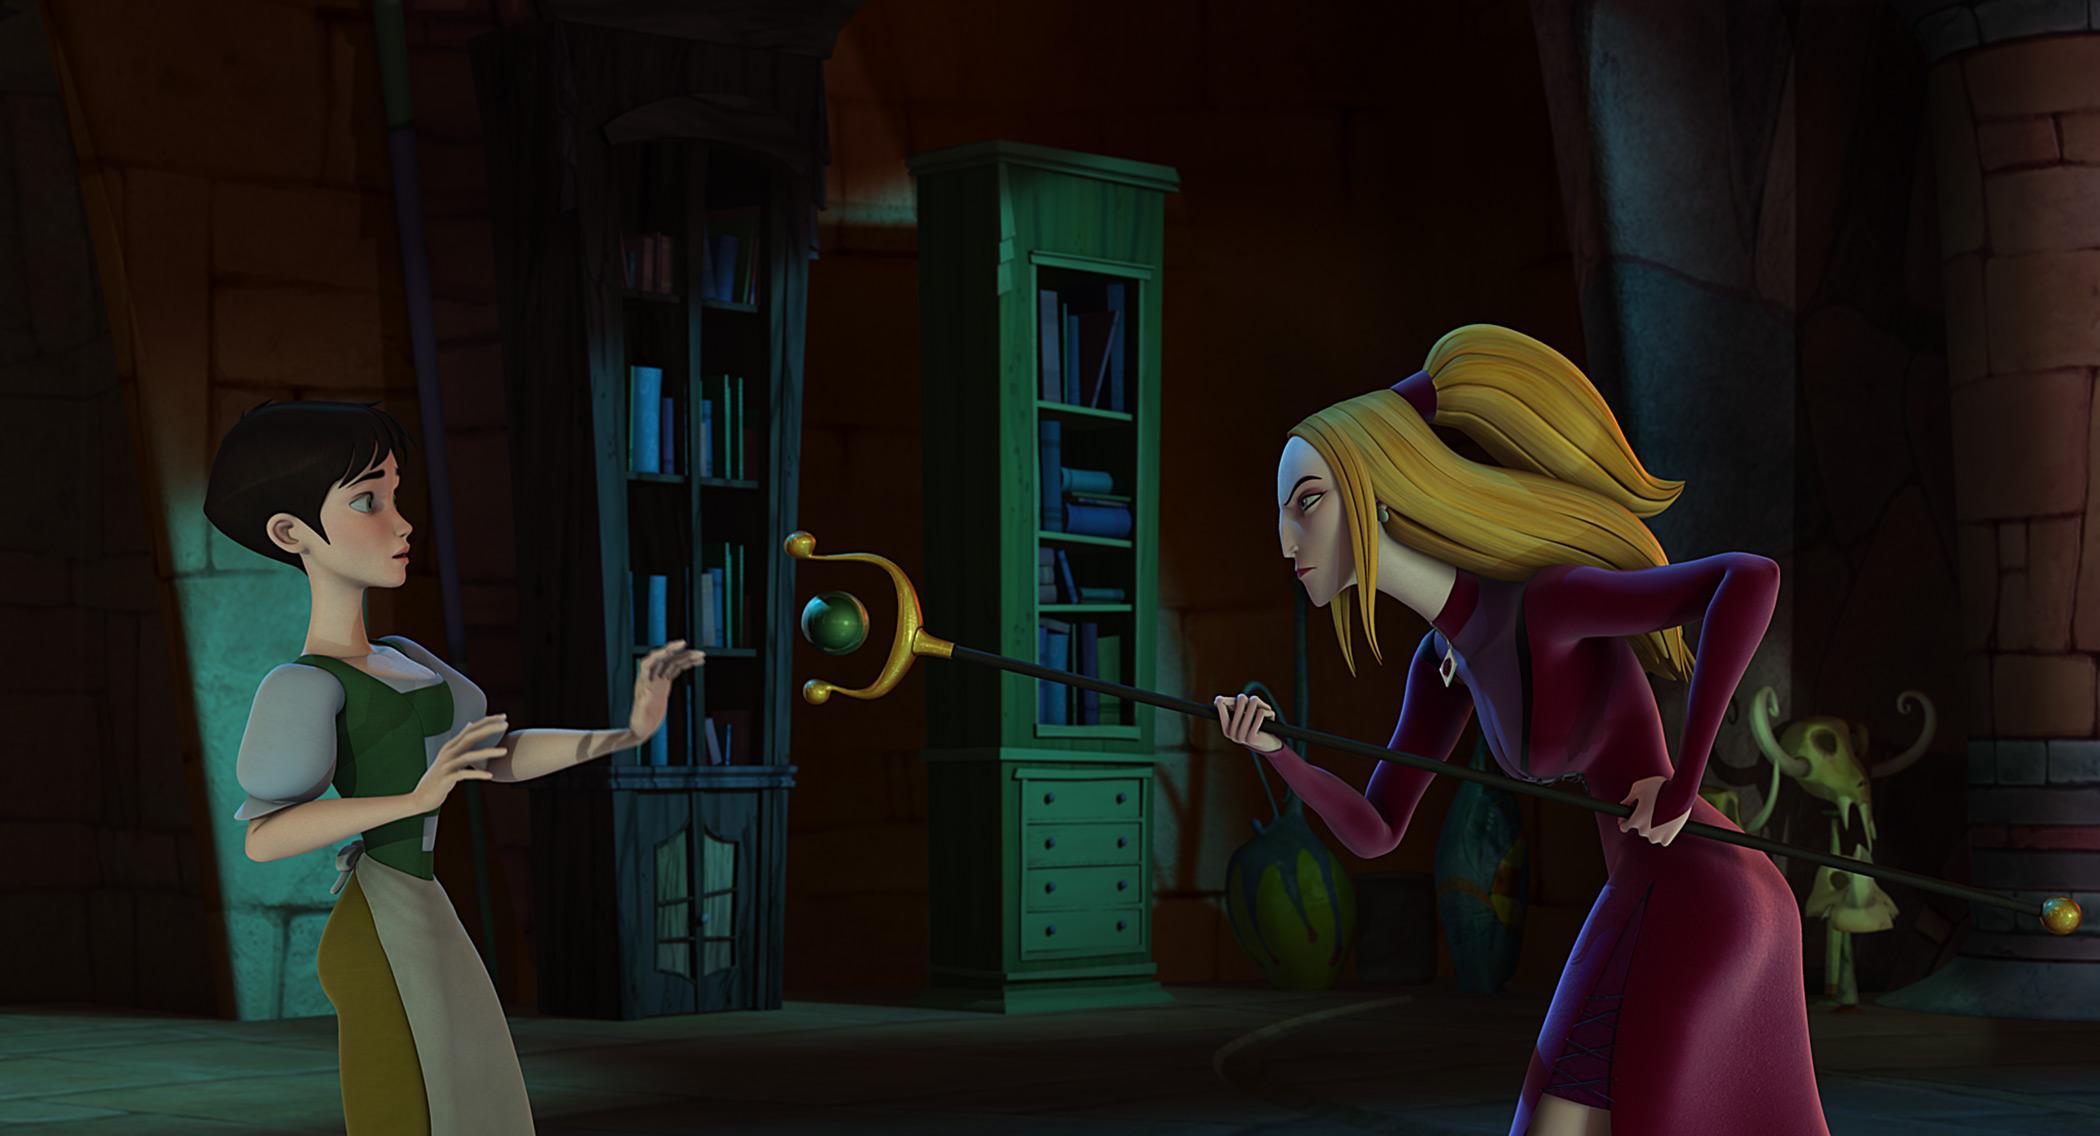 HD Wallpapers Ella (voiced by Sarah Michelle Gellar) and Frieda (voiced by Sigourney Weaver) in HAPPILY N'EVER AFTER